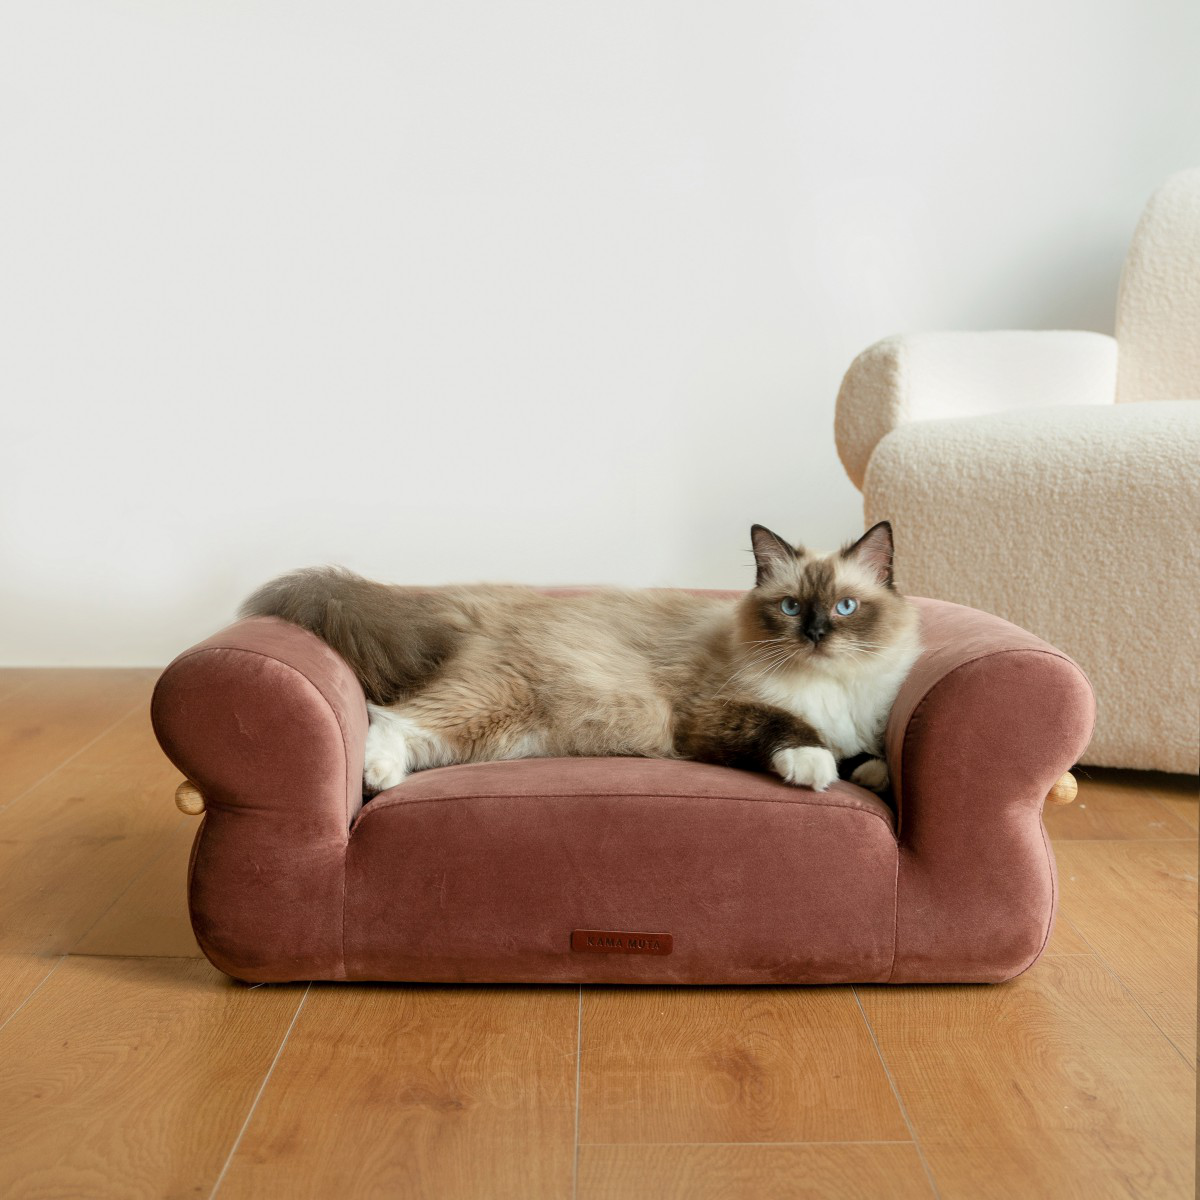 Fluffy Bread Pet Bed by Chen Liang